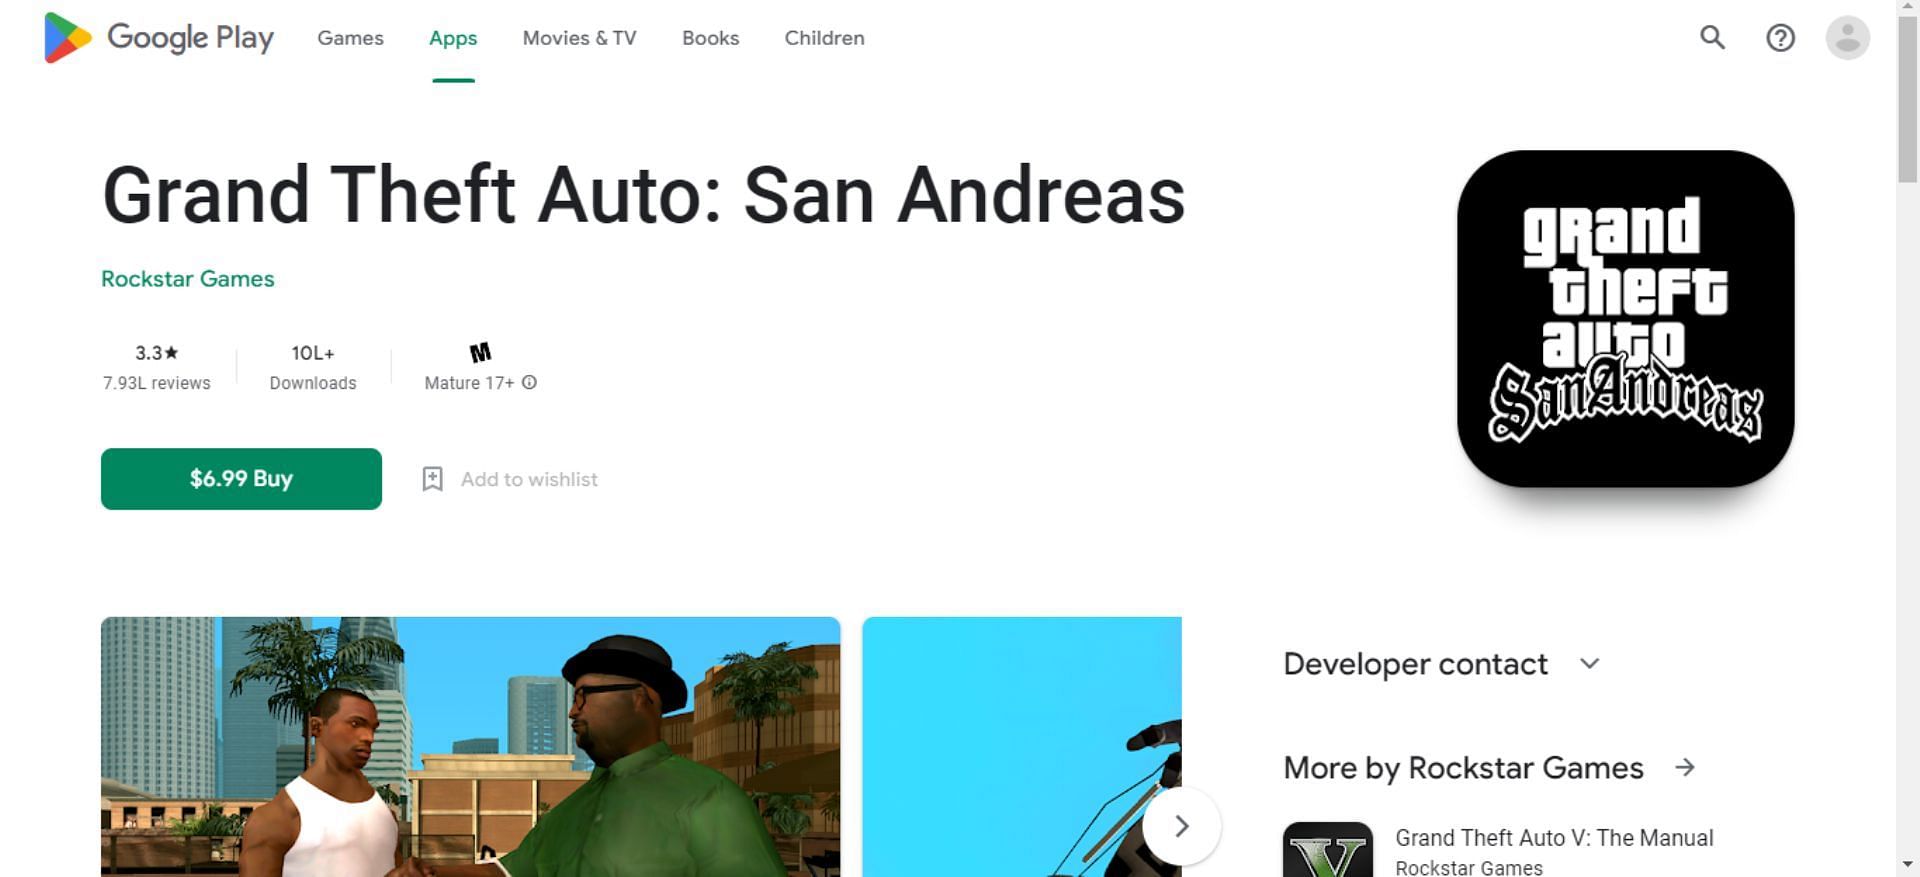 GTA San Andreas APK + OBB download link for Android in 2023